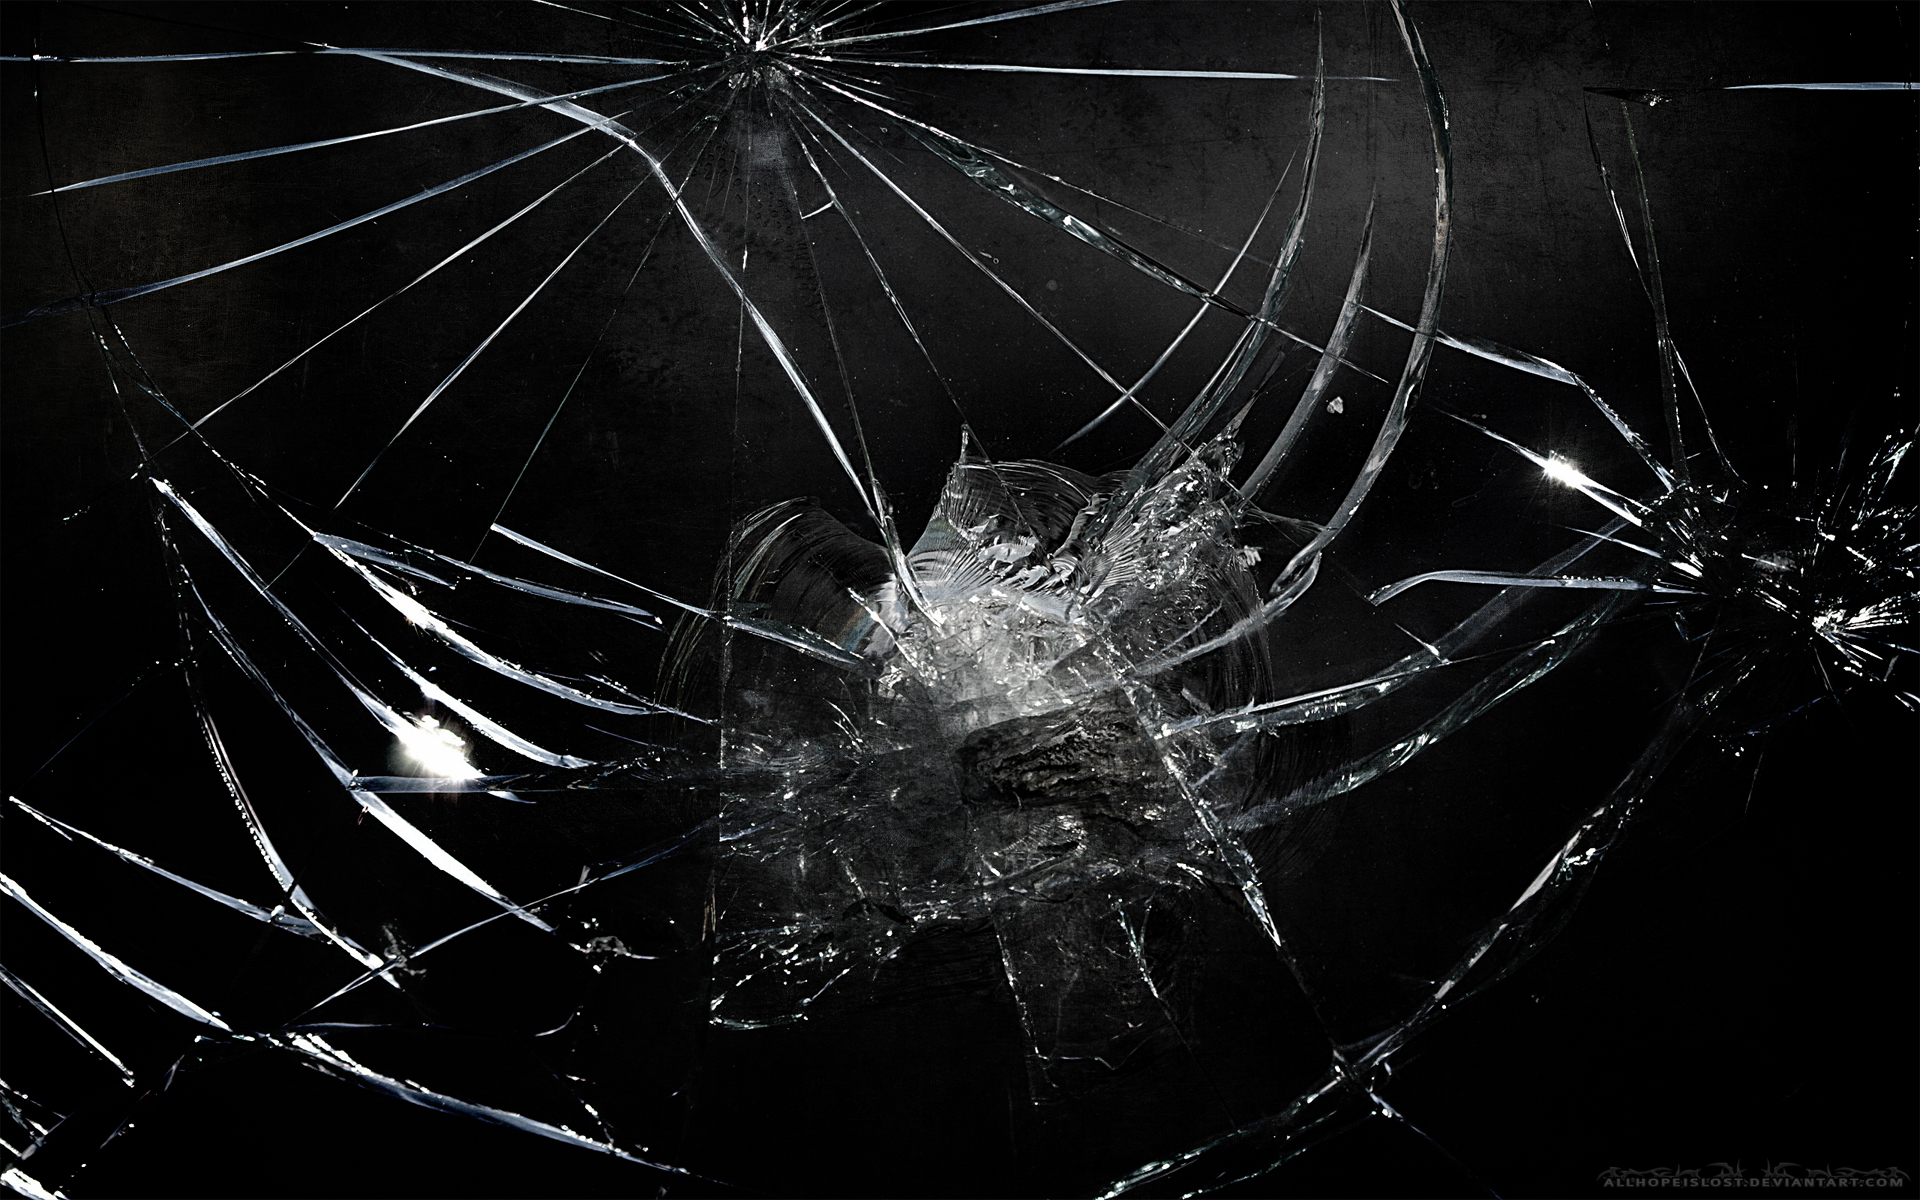 cracked screen black windows exclusive hd wallpapers 2258 cracked